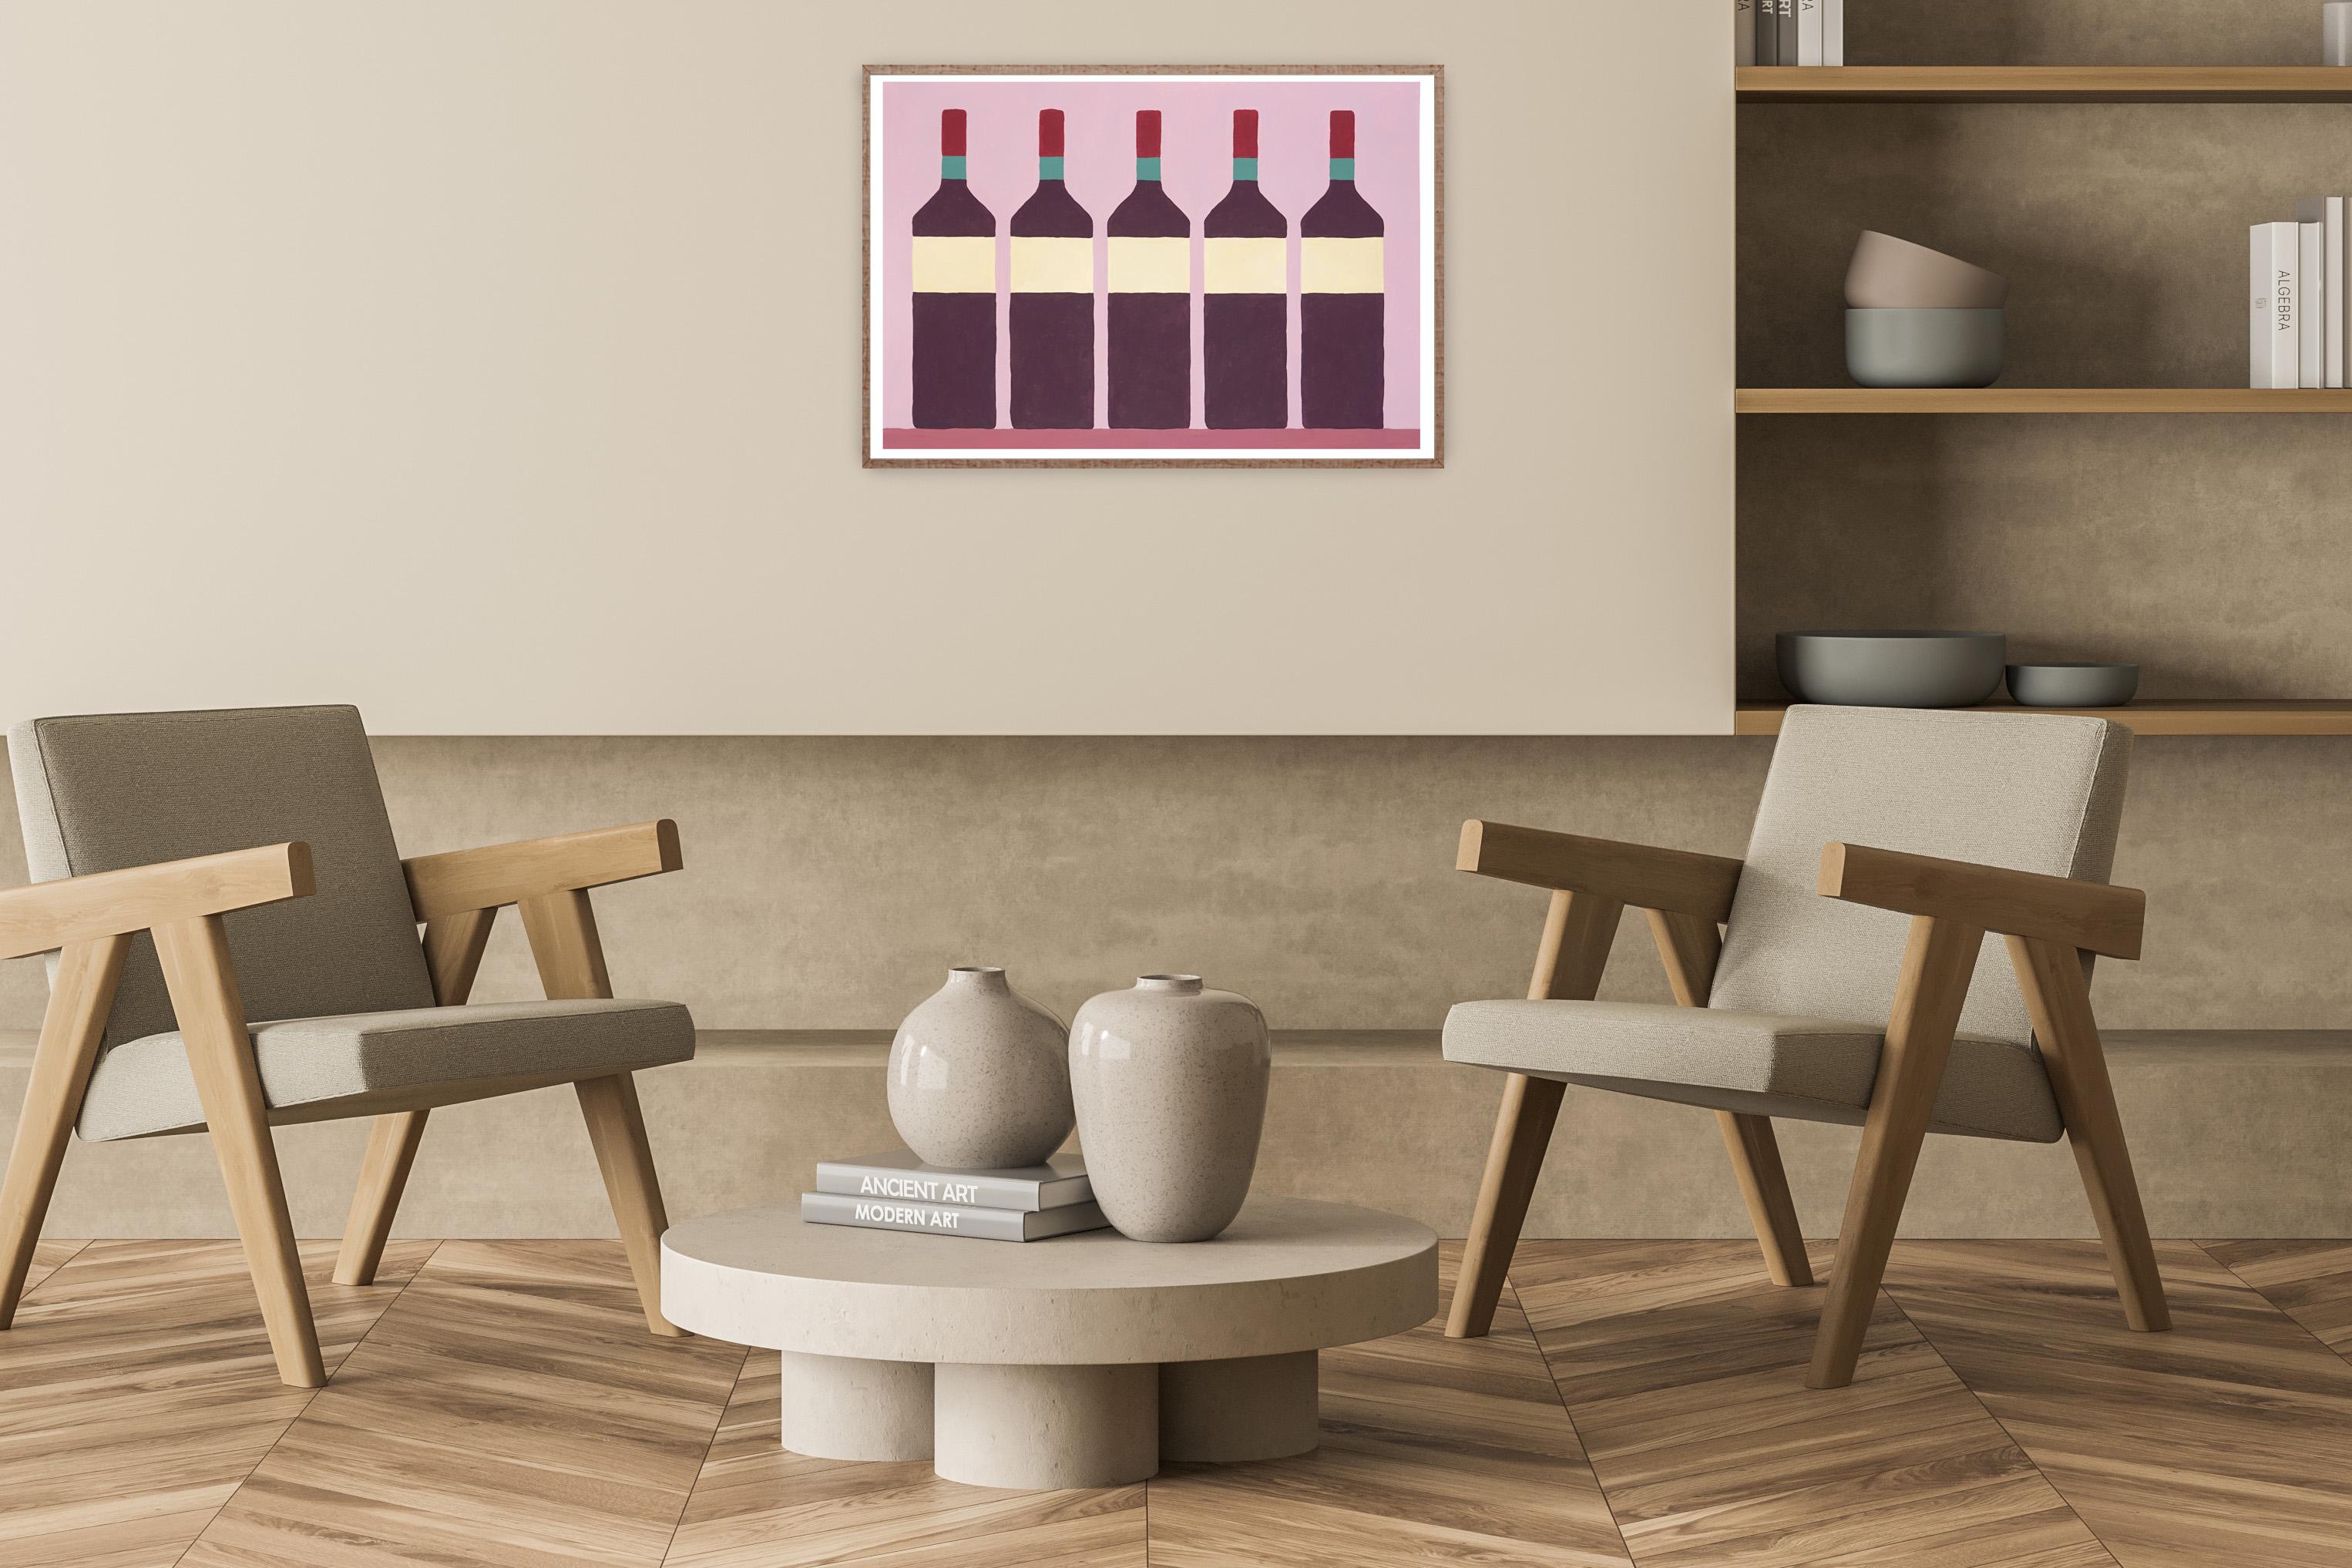 The Wine Cabinet, Bottles Display,  Pink Tones, Modern Still Life Naive Realist  For Sale 1